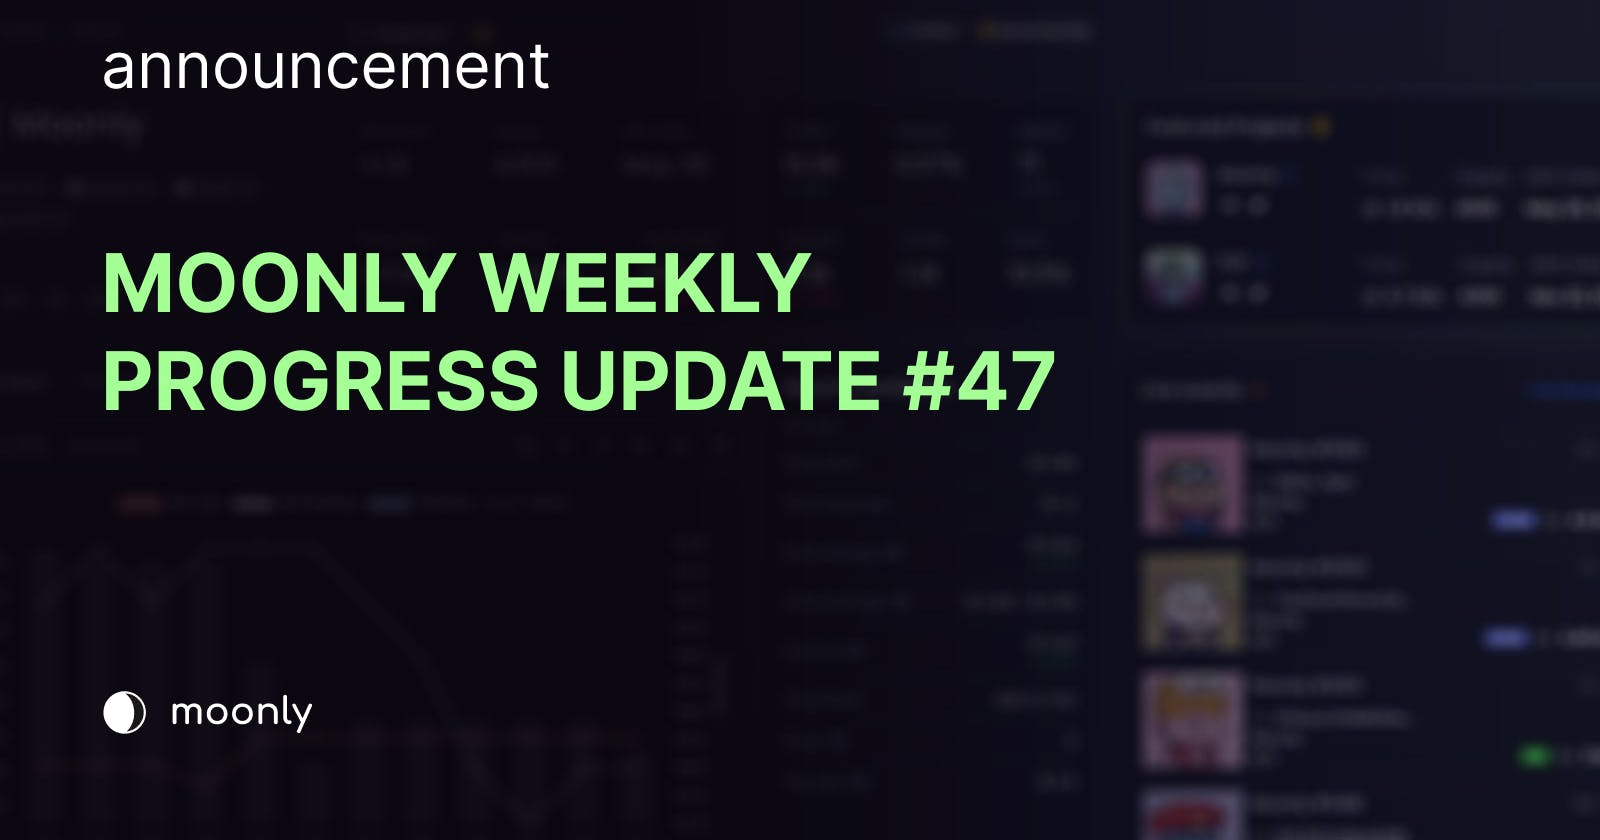 Moonly weekly progress update #47 - Testing Raffle Feature